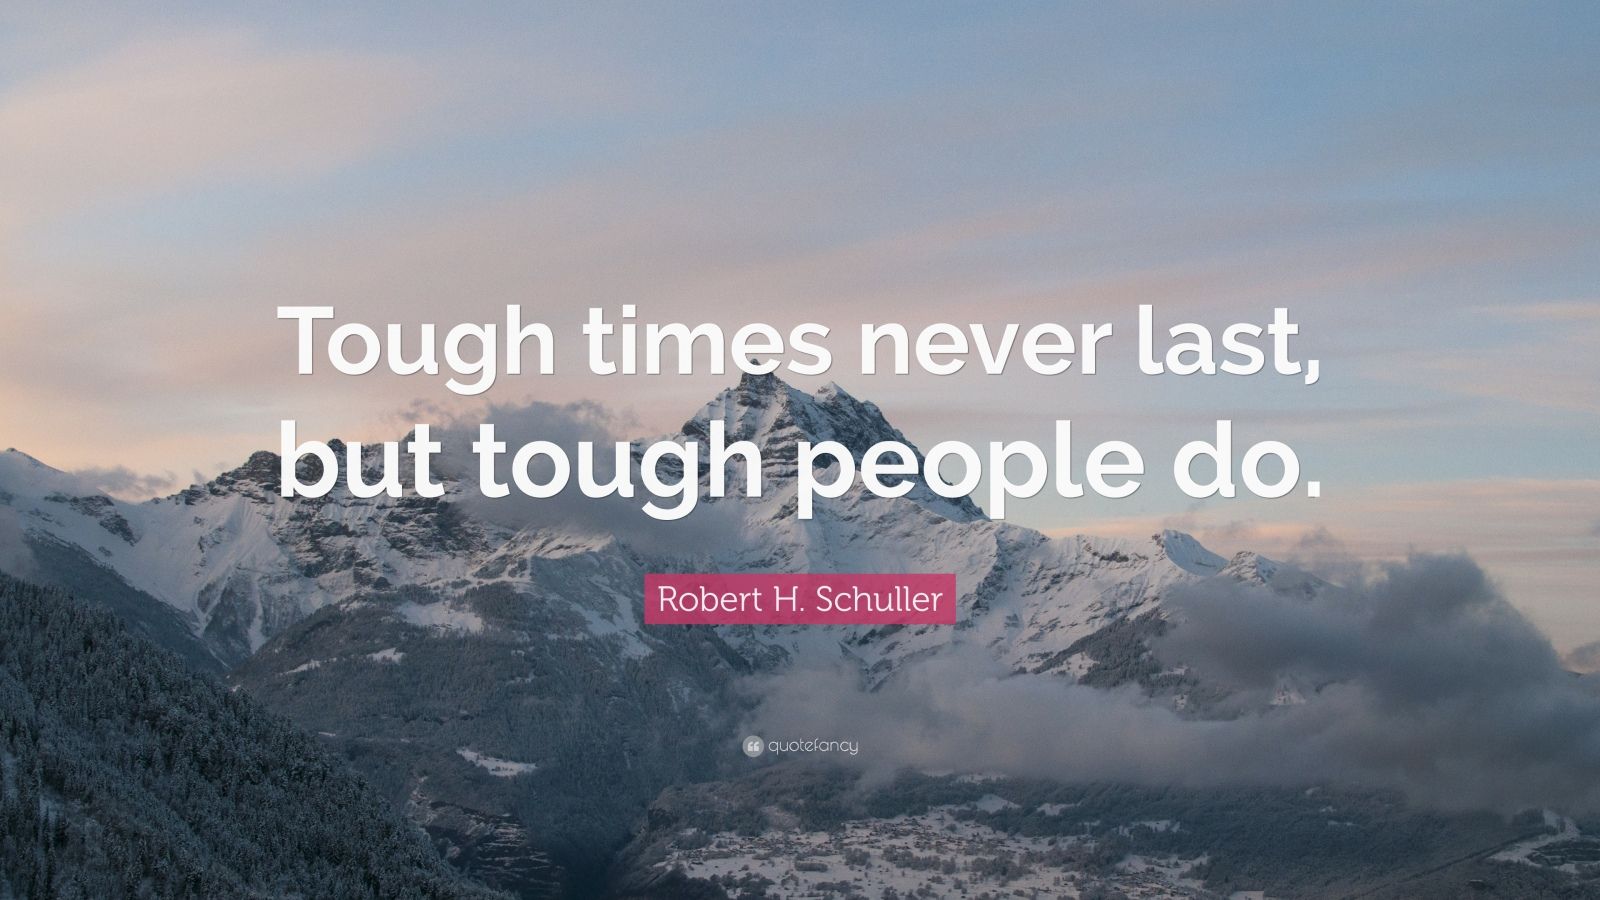 Robert H. Schuller Quote: “Tough times never last, but tough people do ...